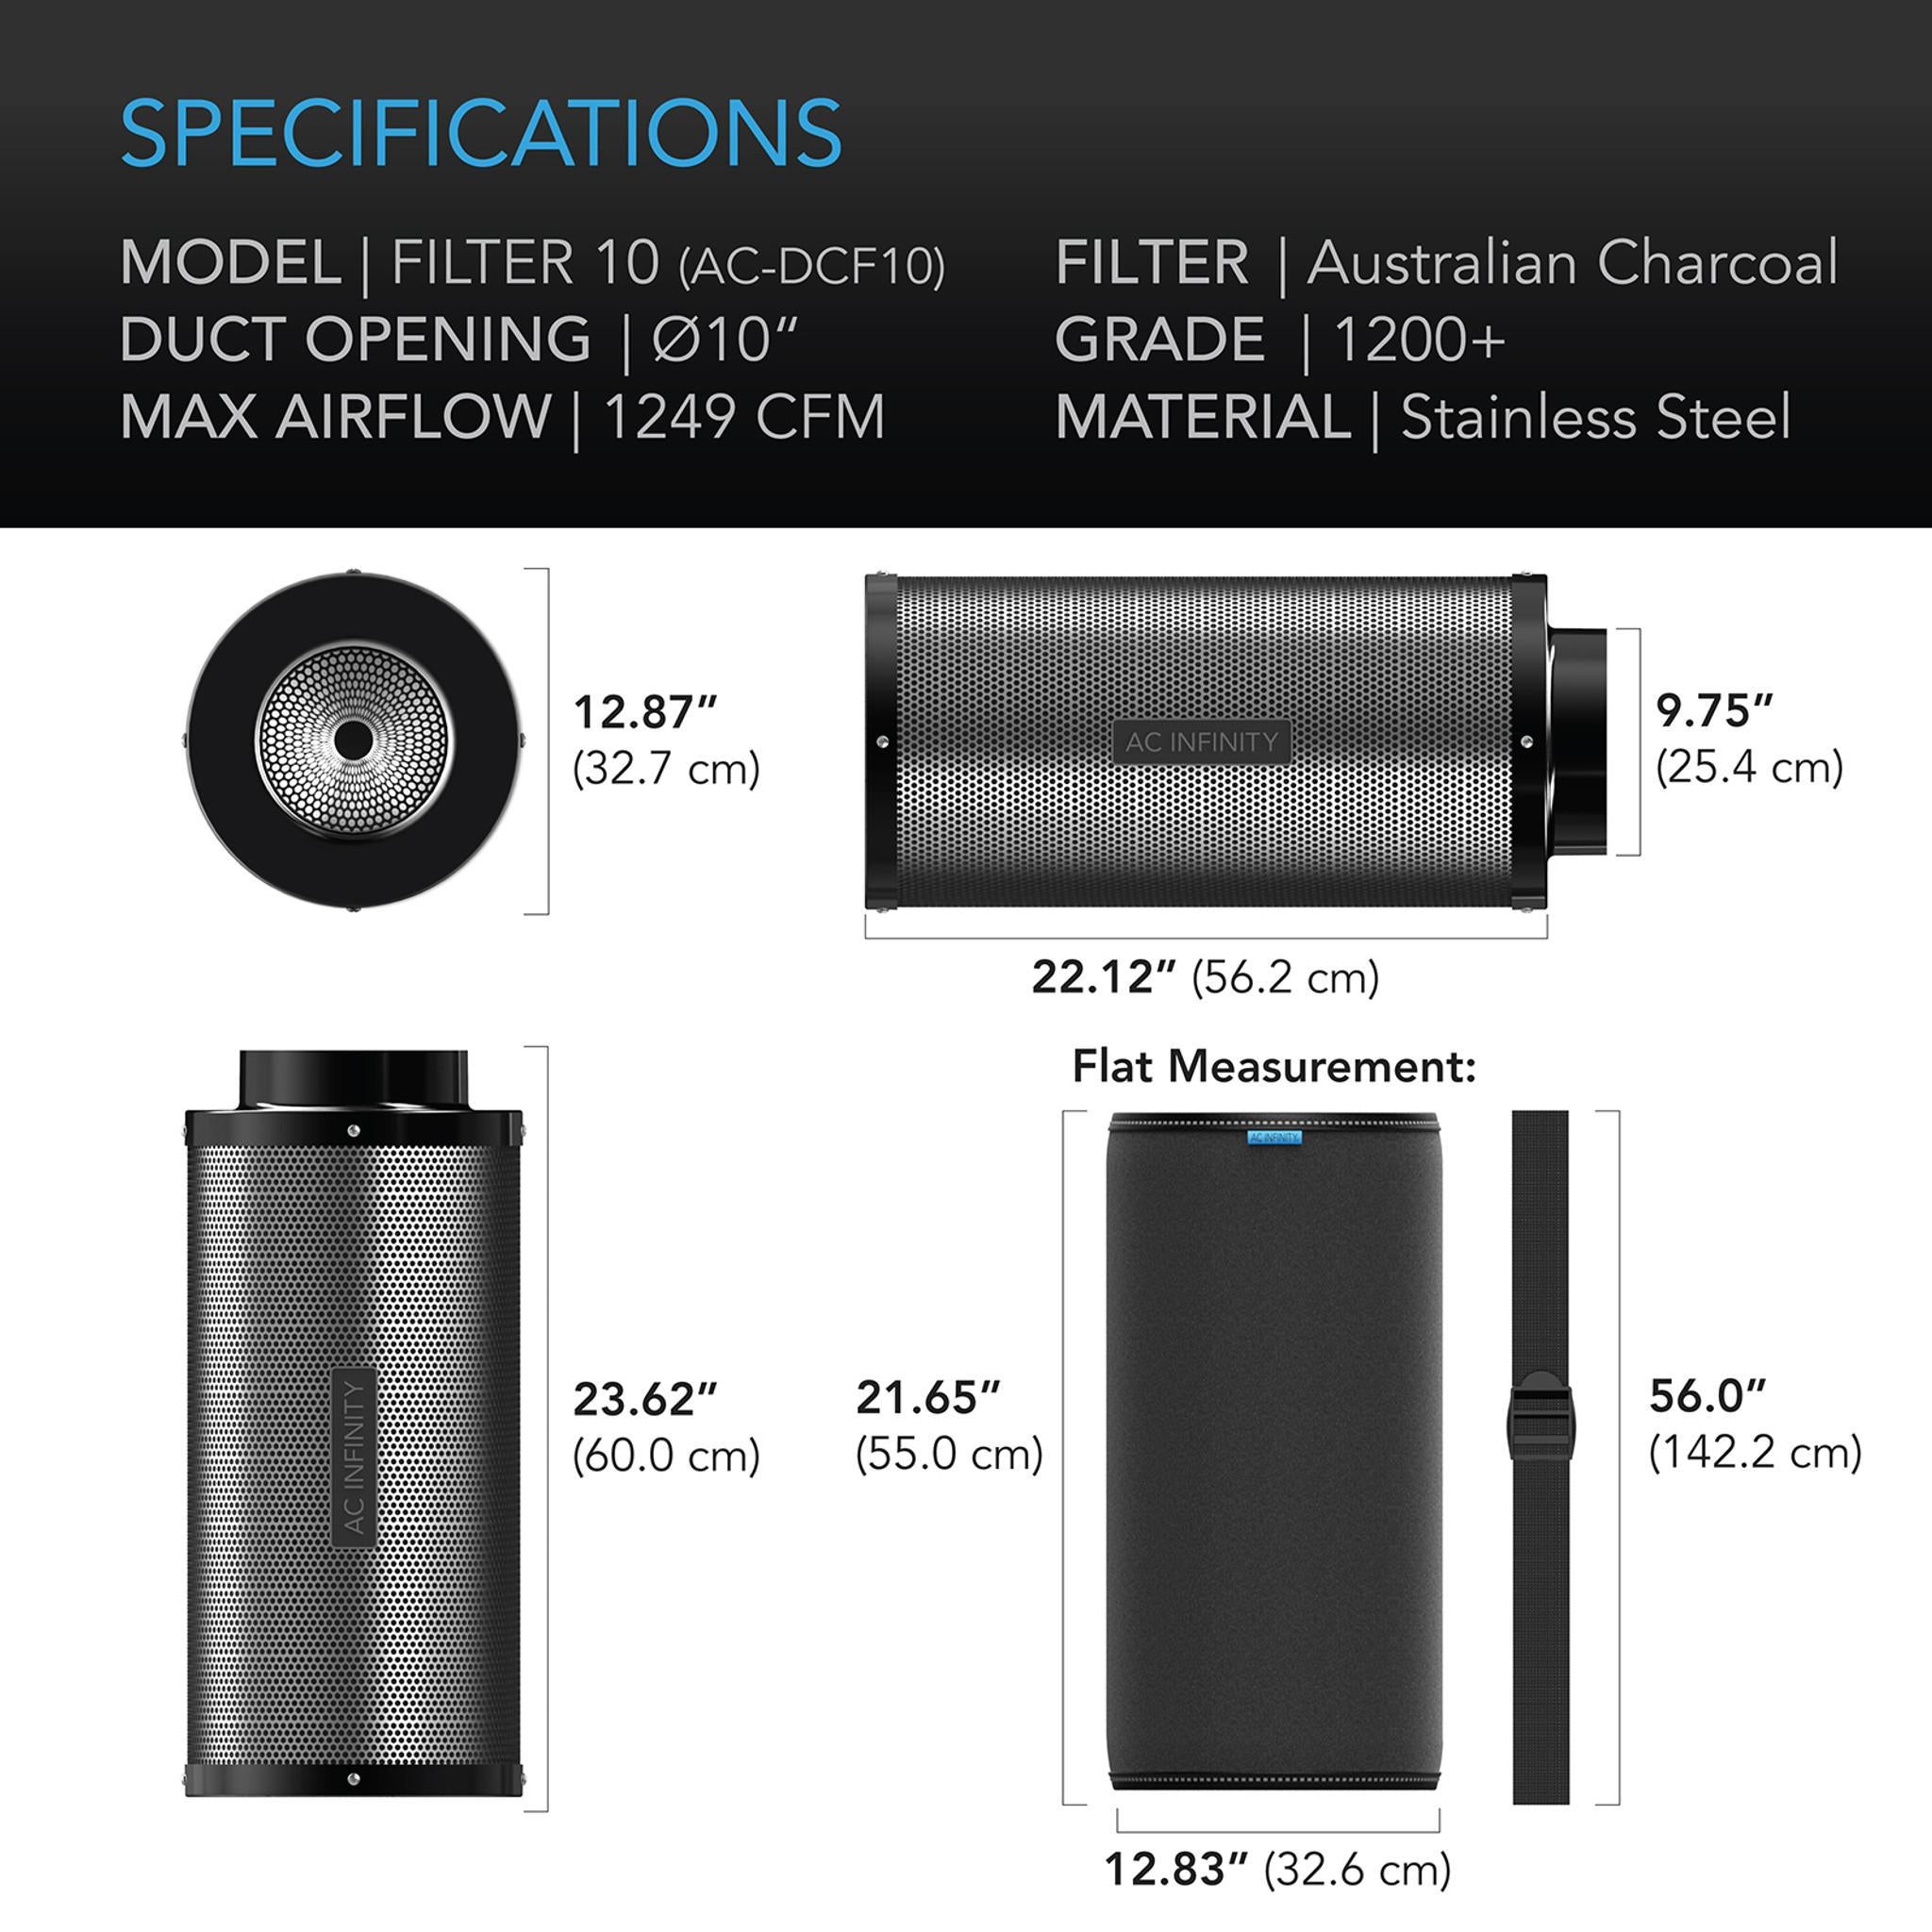 250mm AC Infinity Carbon Filter specs